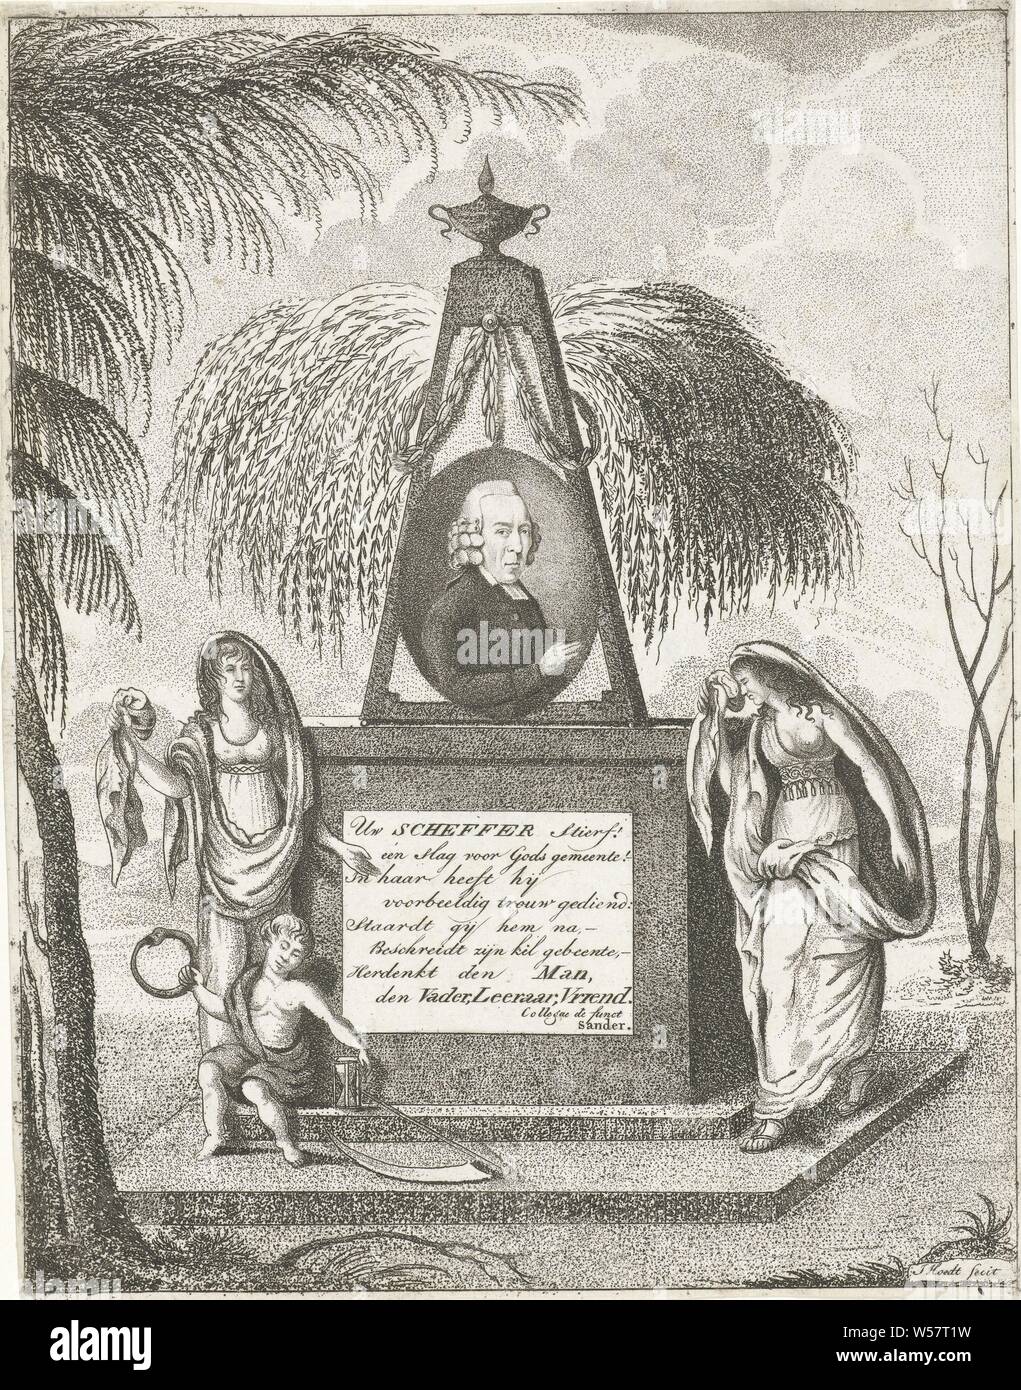 Portrait of Scheffer on a grave monument, Grave monument with a portrait to the right of Scheffer, half to the right. Two women in antique robes and a child grieve at a tomb in a landscape. The child is surrounded by a scythe, hourglass and an ouroboros, a snake that bites its own tail, as a mythical symbol for eternity. On the monument a text of ten lines in Dutch, grave-building, monument tomb, Jacob Hugo Hoedt (mentioned on object), Rotterdam, 1785 - 1826, paper, etching, h 212 mm × w 167 mm Stock Photo